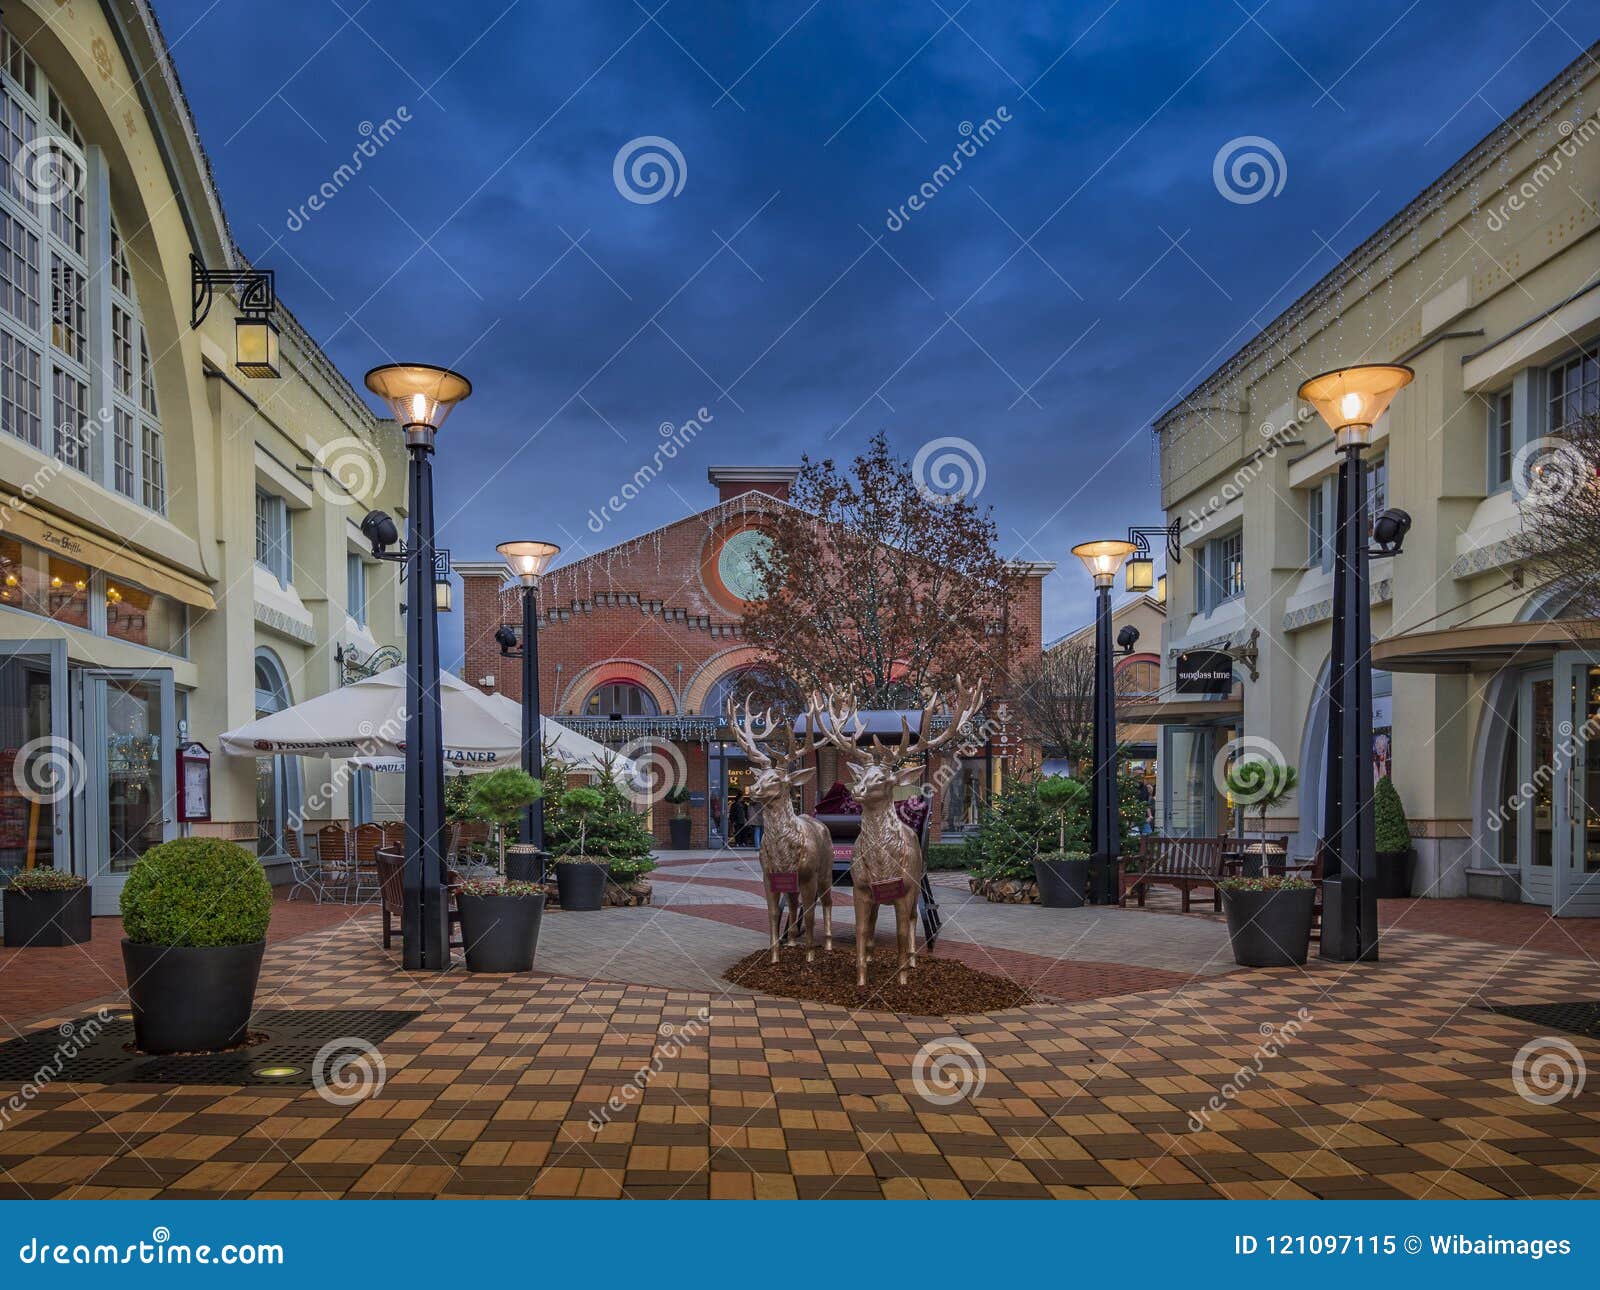 Factory Outlet, Ingolstadt Village, Bavaria, Germany Editorial Image - Image of outlet, mall ...